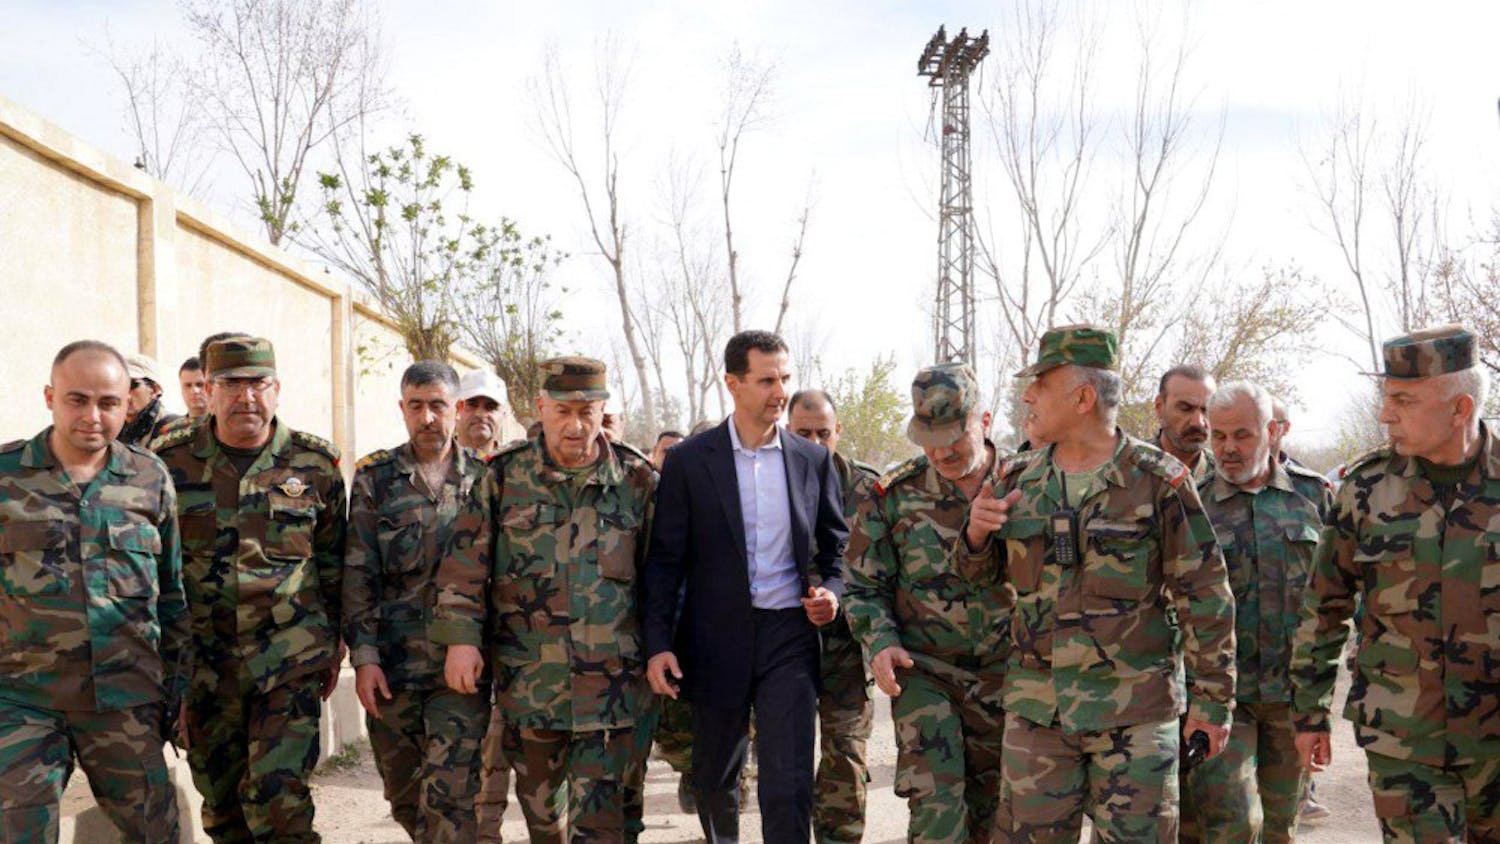 Syrian President Bashar al-Assad visits with regime forces in Eastern Ghouta on March 18, 2018. (SalamPix/Abaca Press/TNS) 